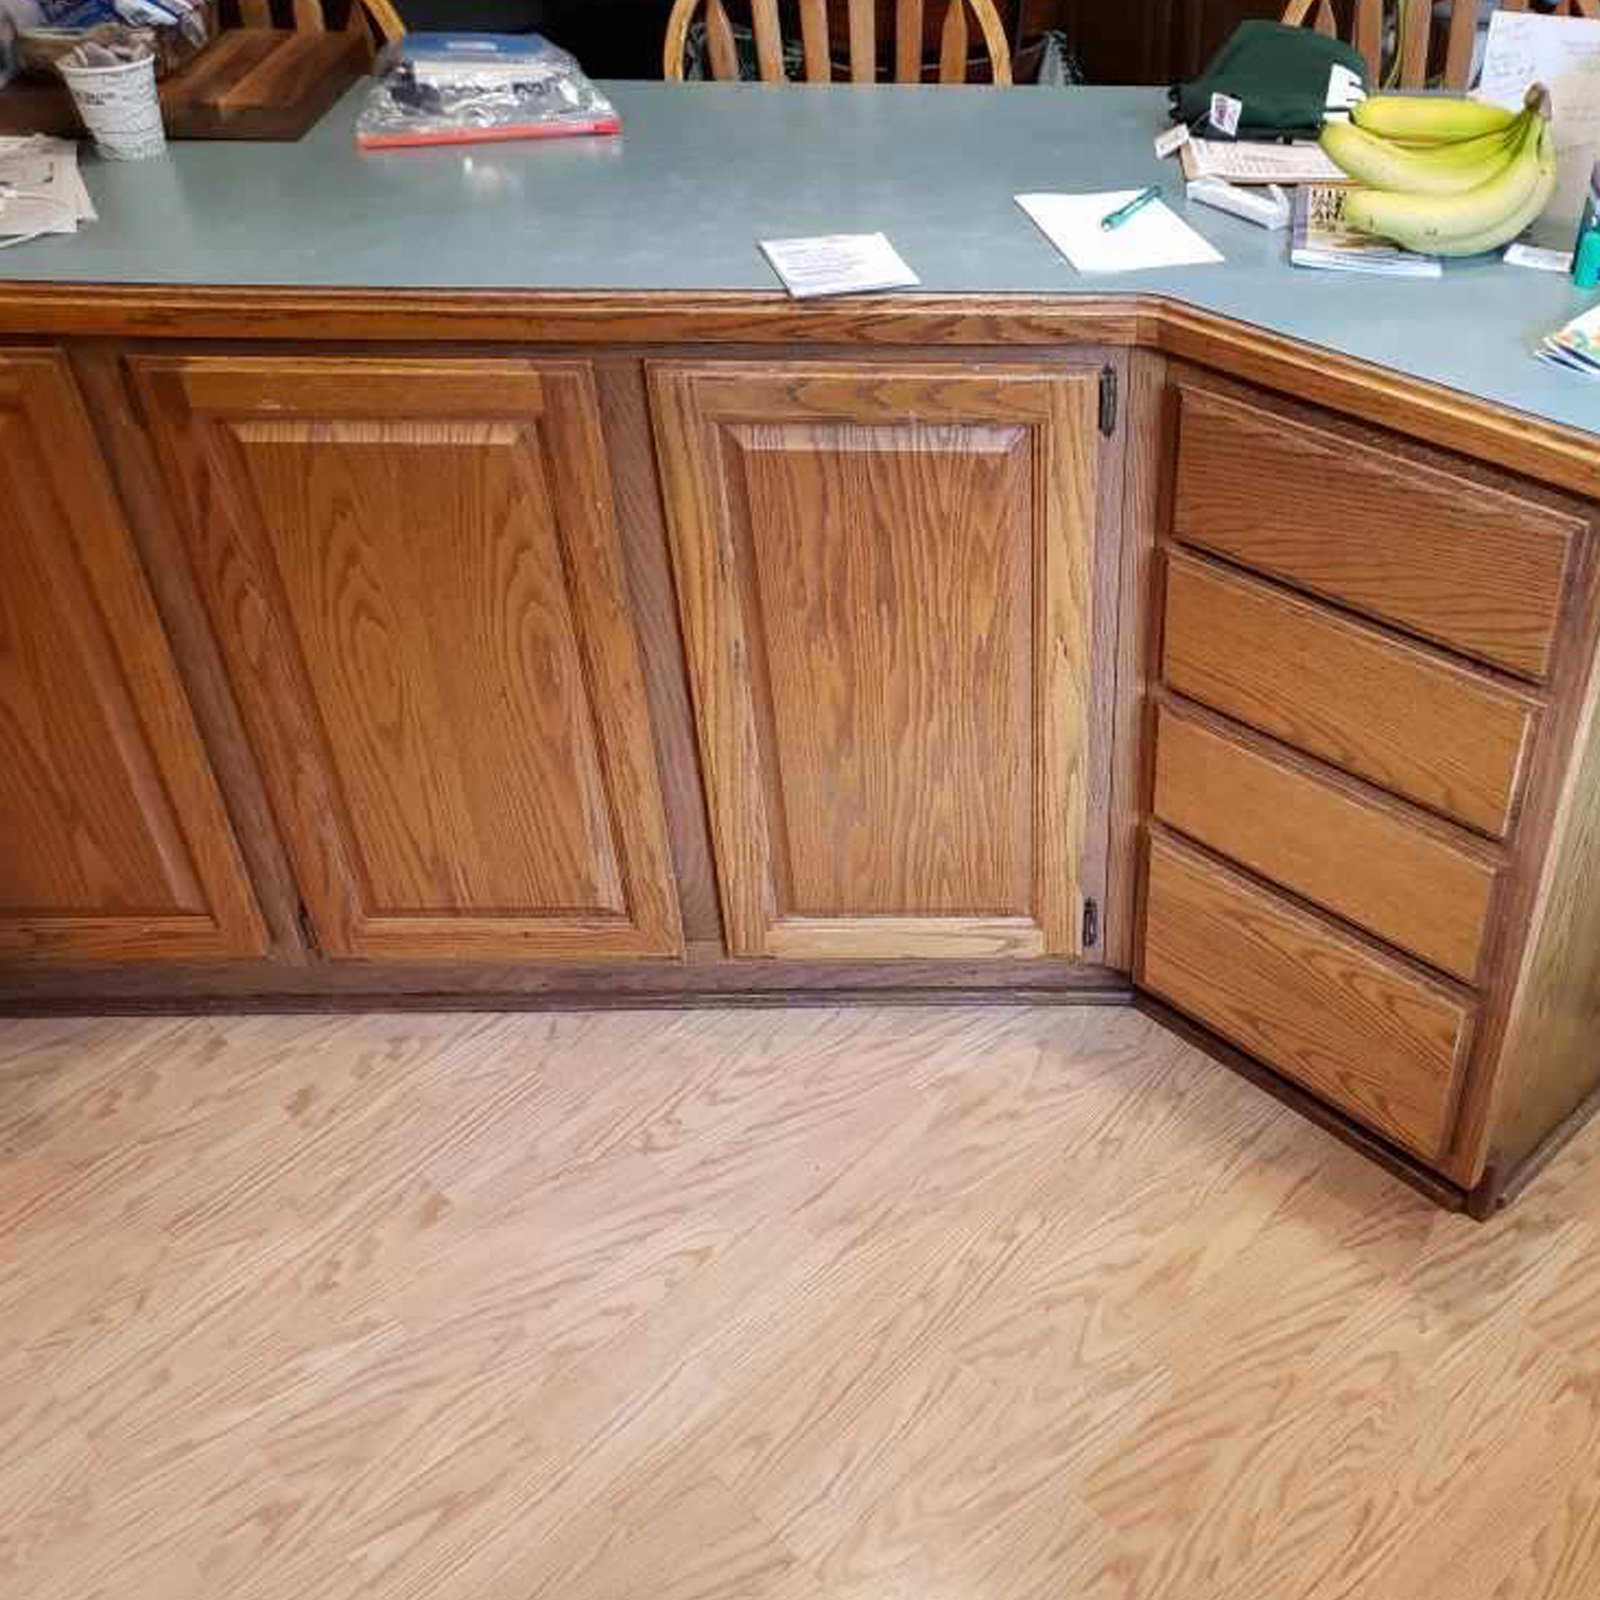 Entry 38 - These cabinets are definitely starting to show their age